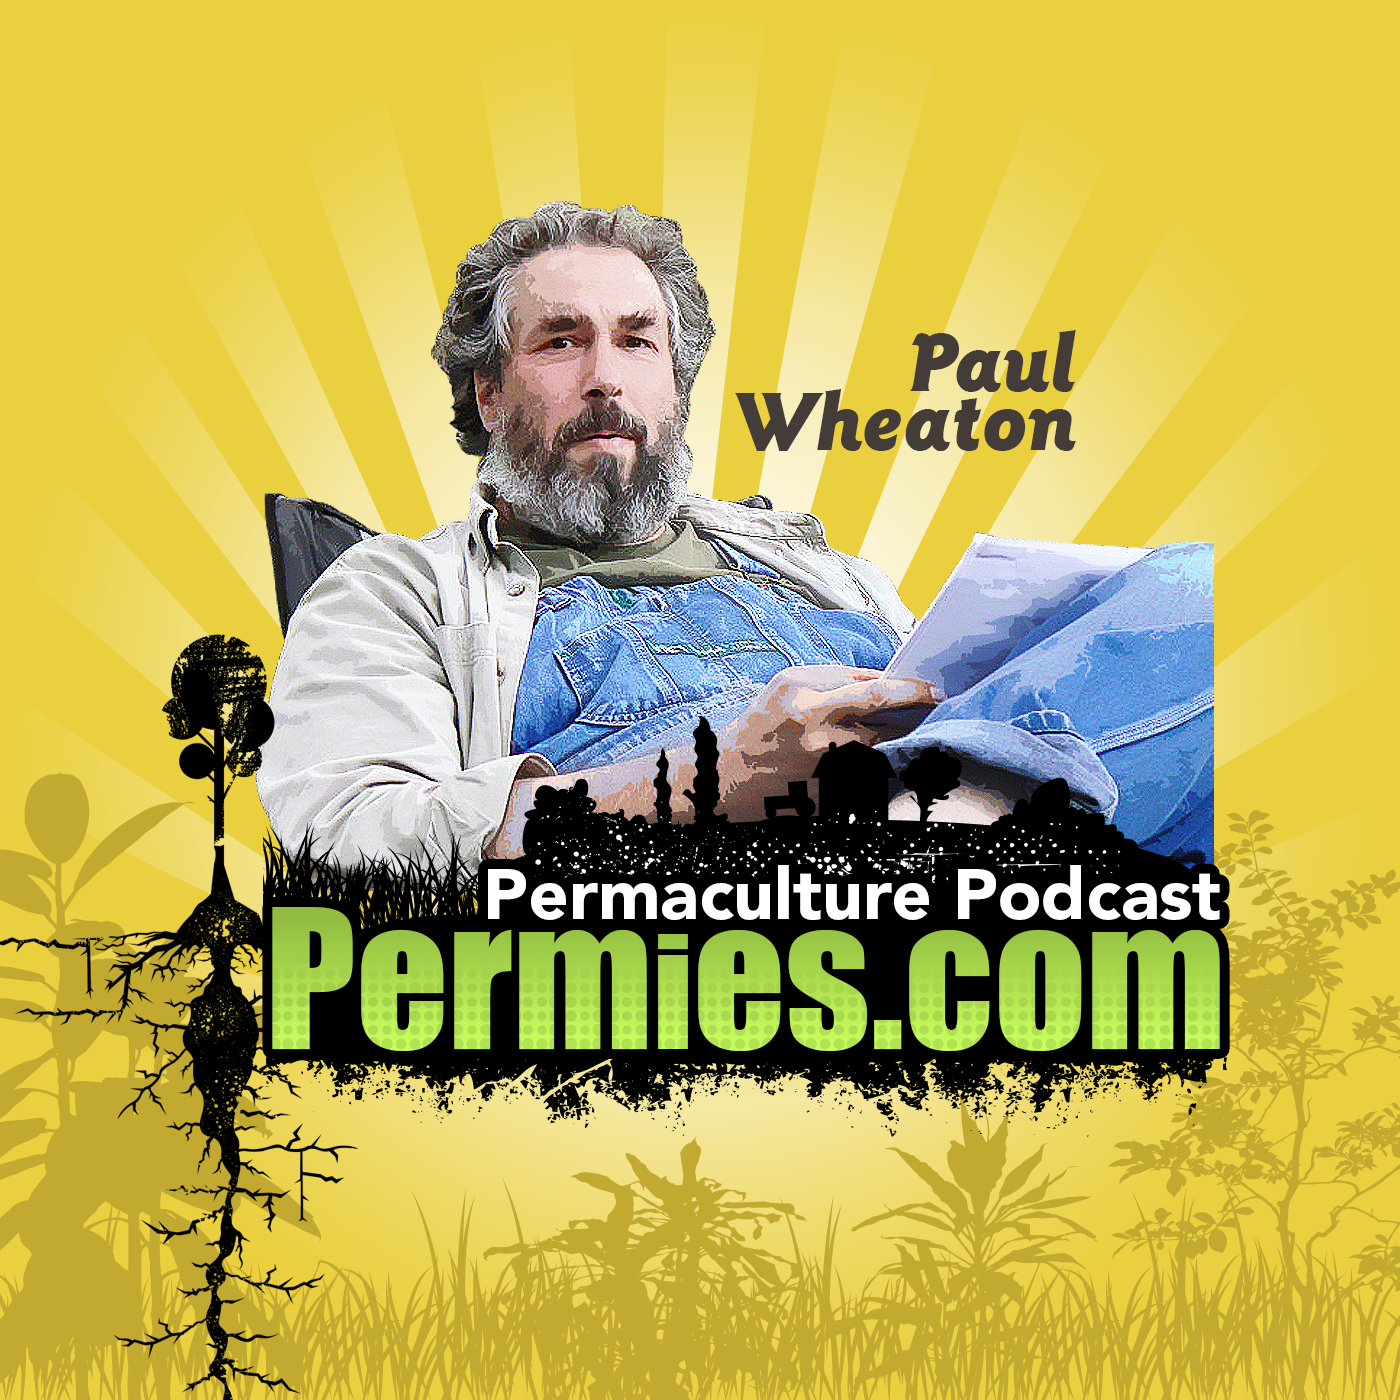 Permaculture Podcast by Paul Wheaton